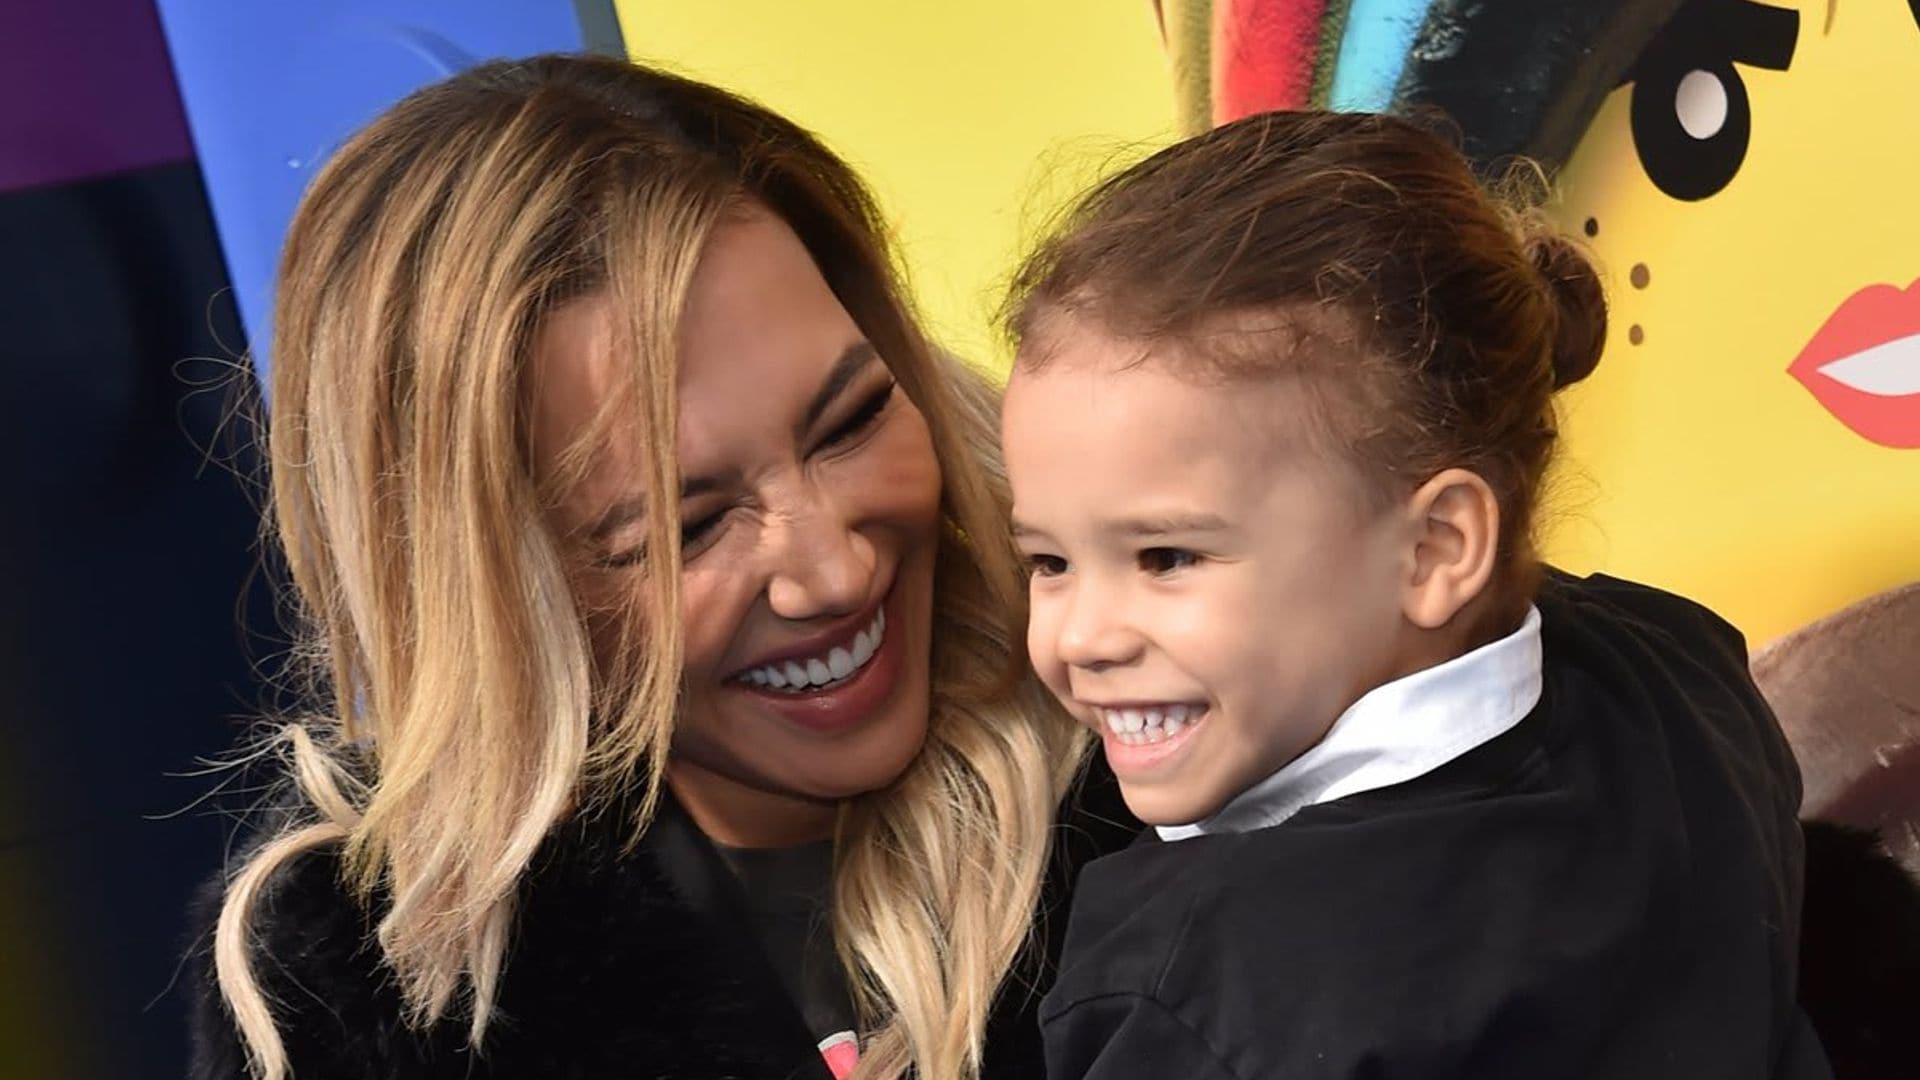 Naya Rivera’s heartbreaking final moments with her son revealed in new report